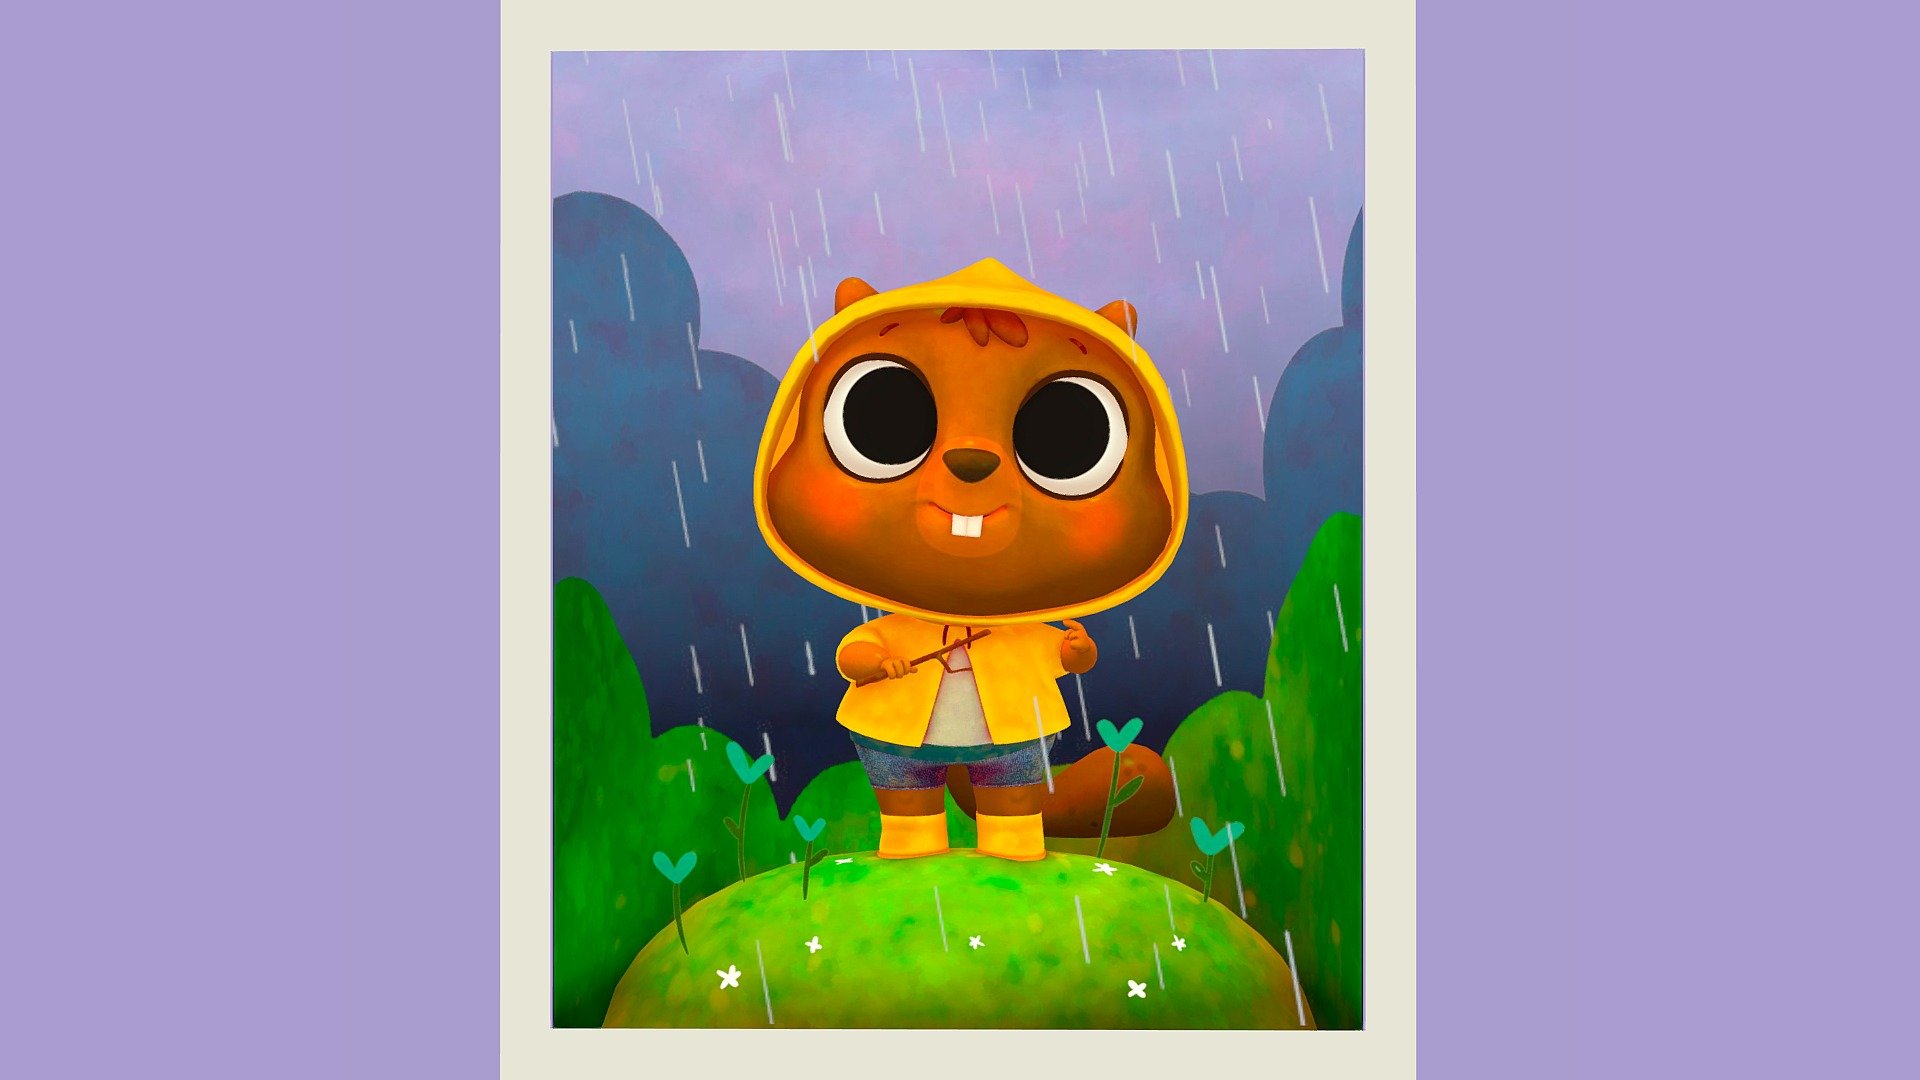 Another updated work to upload here, is from a few years ago. The concept art of the character is by the illustrator La Pendeja (Núria Aparicio). When I saw it I wanted to create a 3D version. You should see her incredible work, she has illustrations for adults but her work focuses on illustration for children.

Little Beaver concept art 3d model